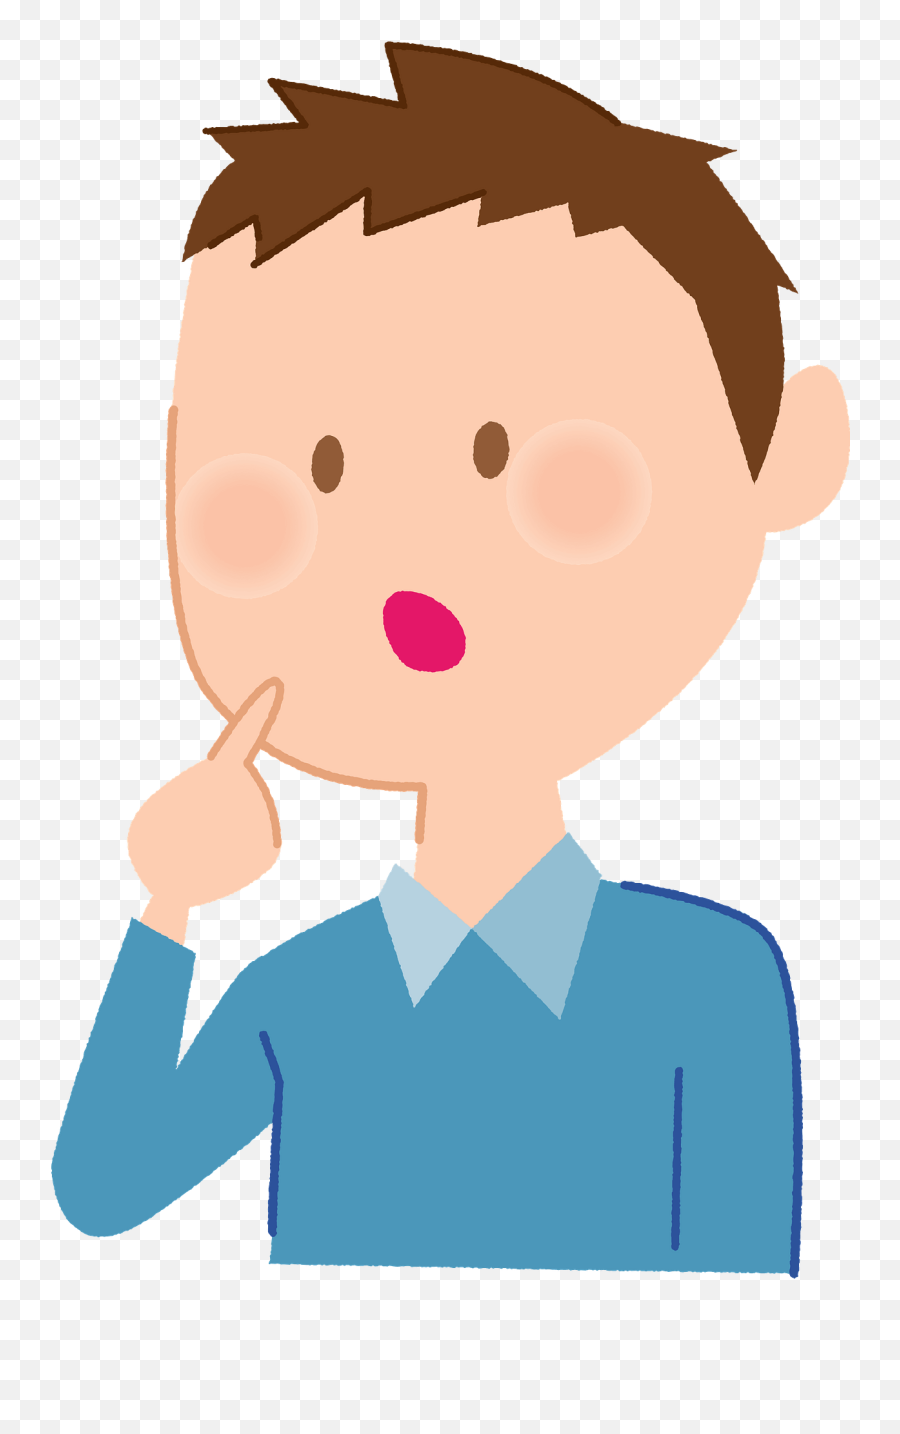 Seth Man Is Thinking Clipart Free Download Transparent Emoji,Thinking Clipart